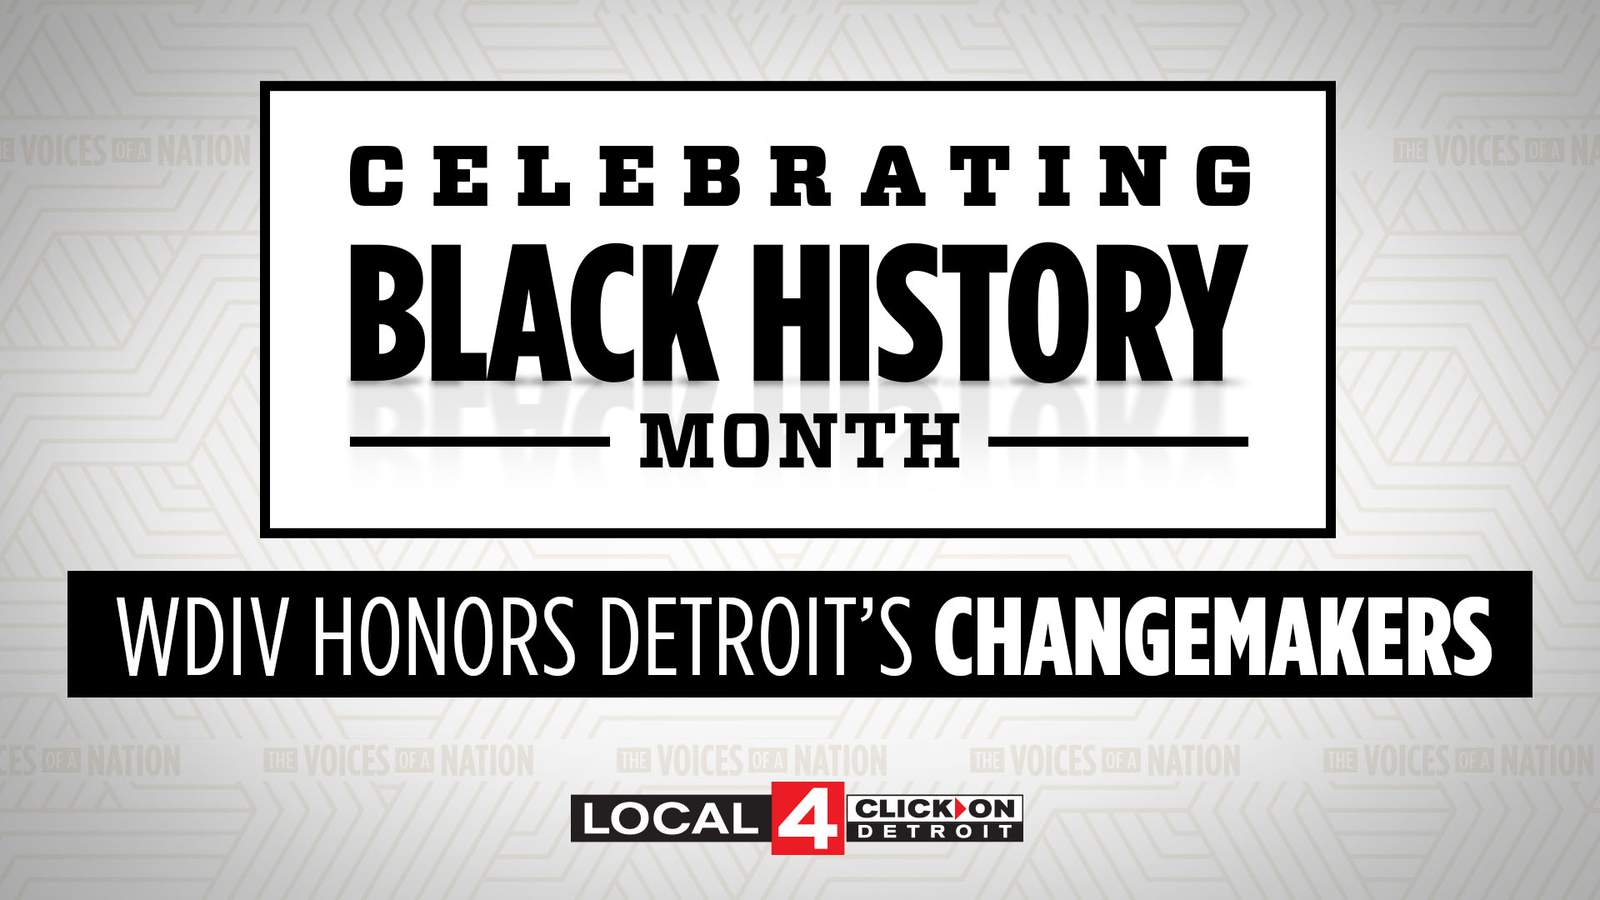 WDIV and ClickOnDetroit honor contributions of African-Americans